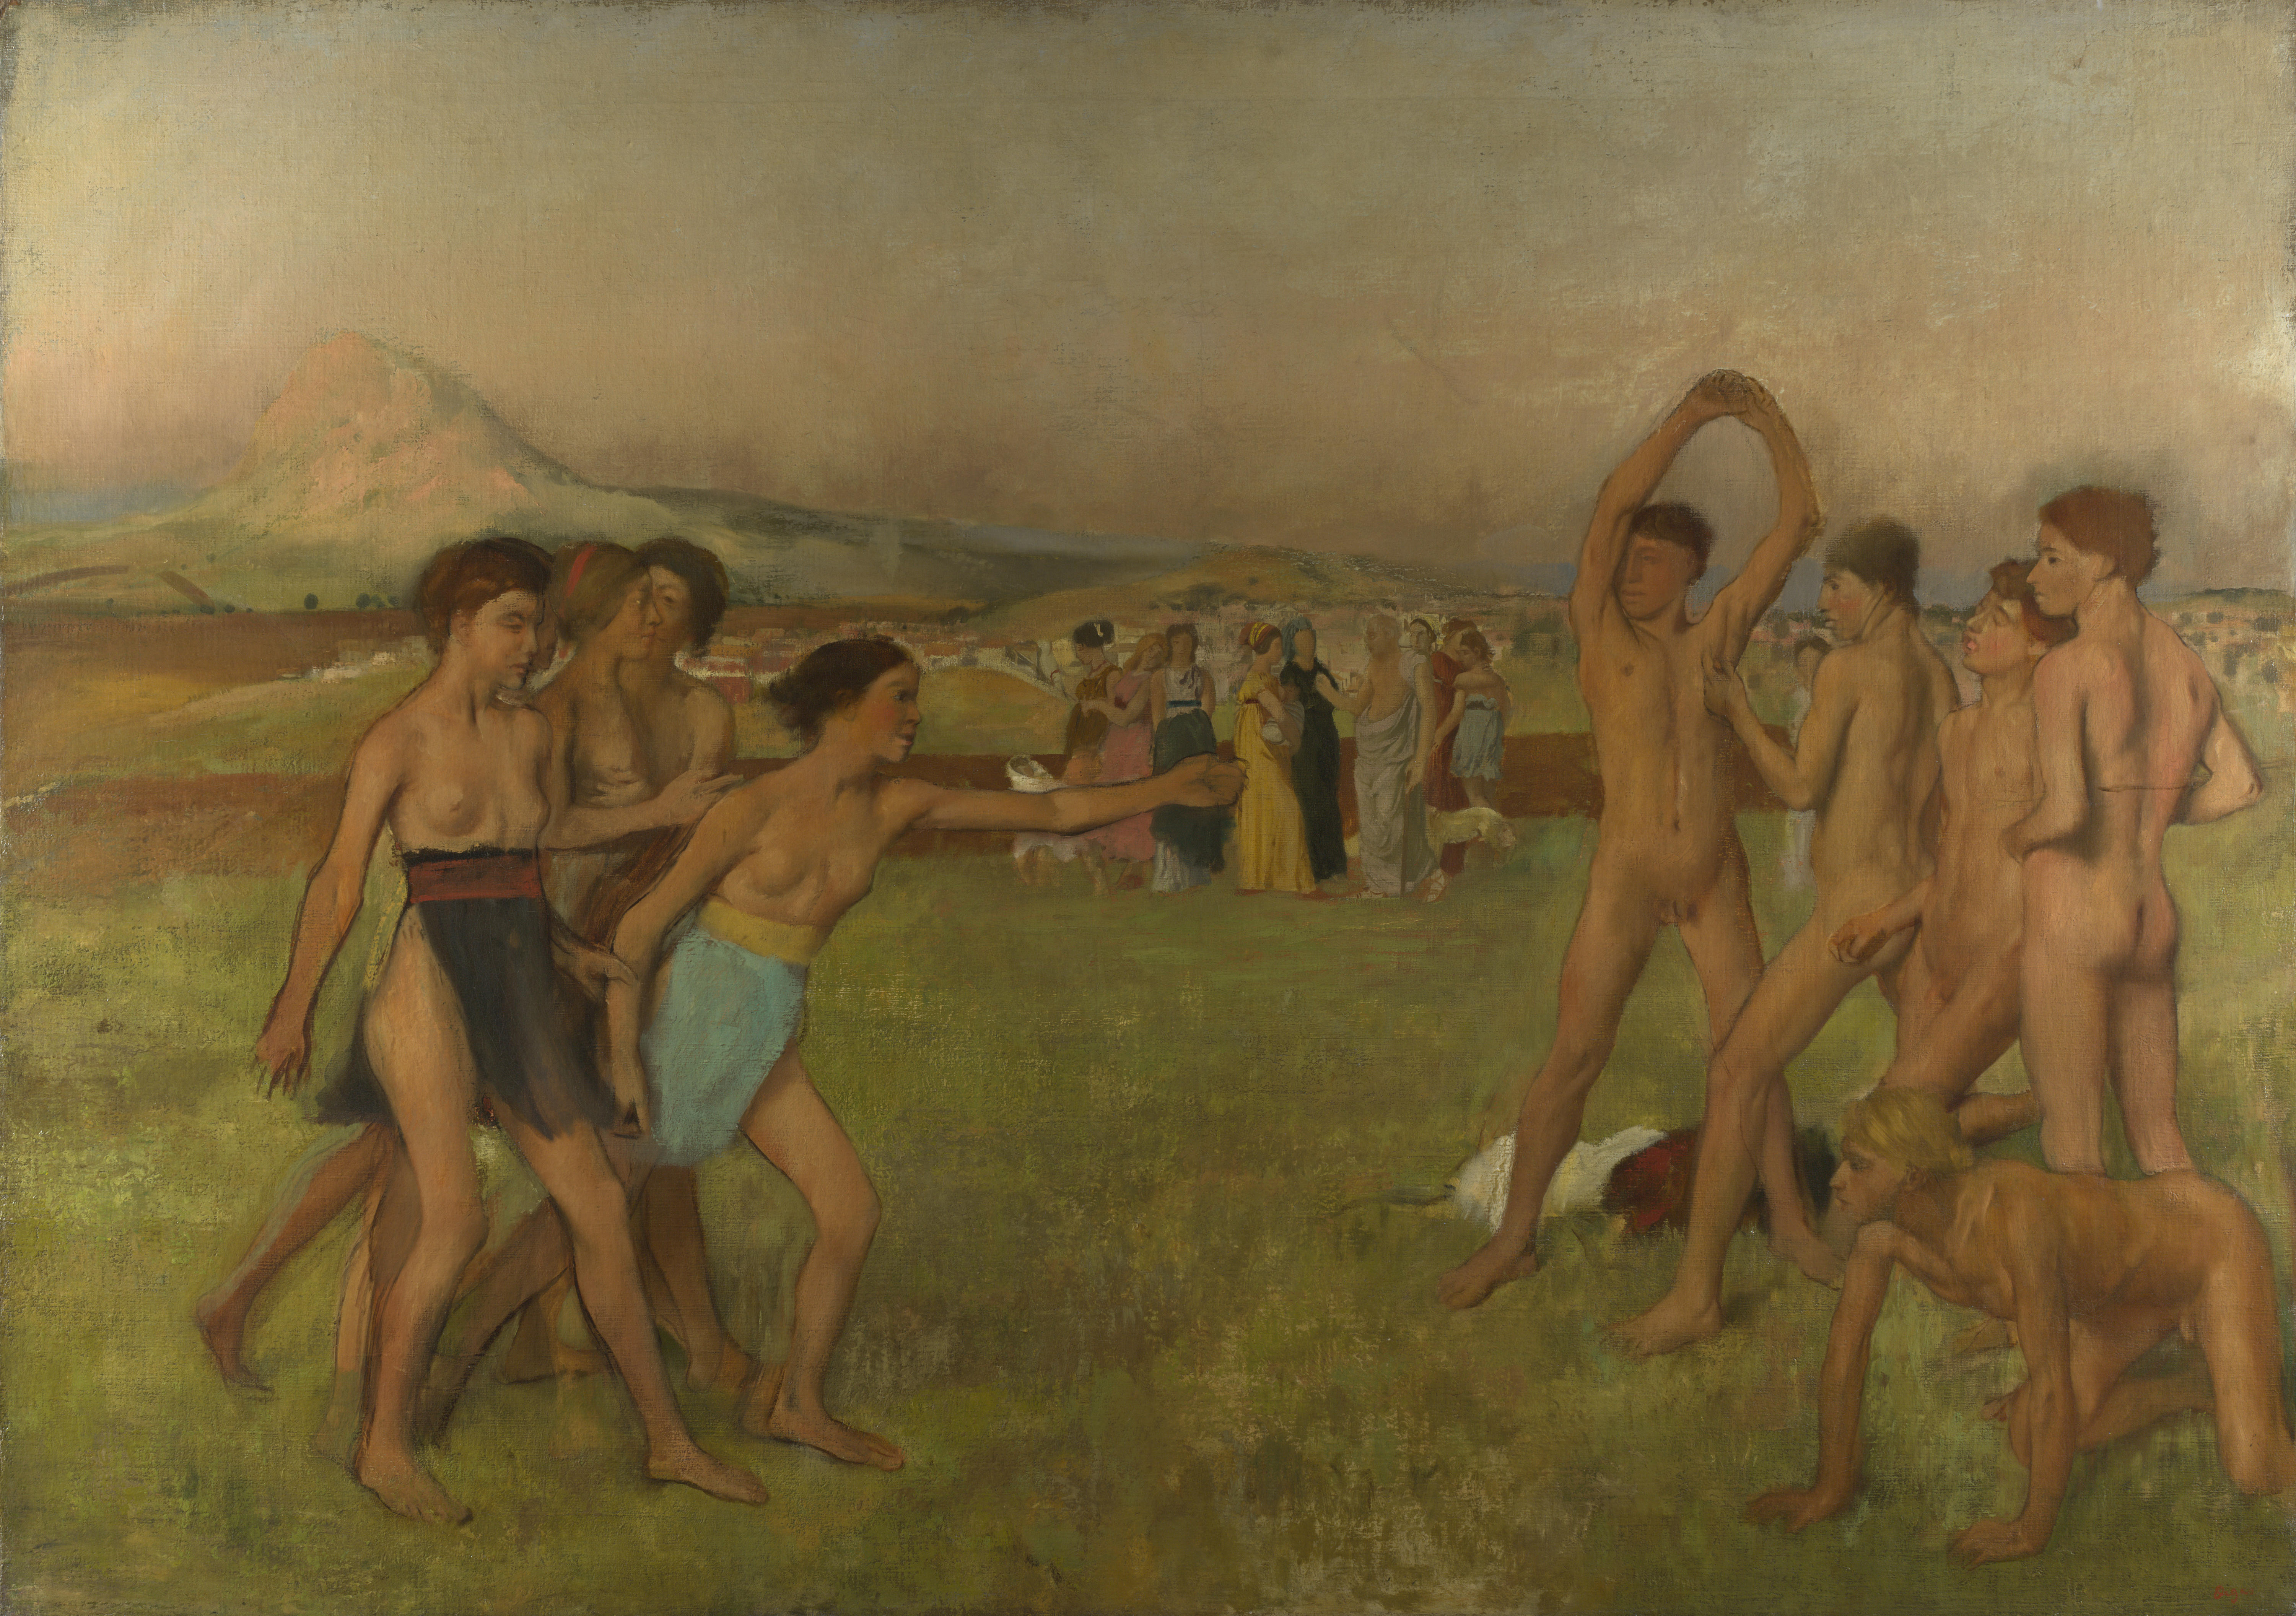 http://upload.wikimedia.org/wikipedia/commons/8/8f/Young_Spartans_National_Gallery_NG3860.jpg